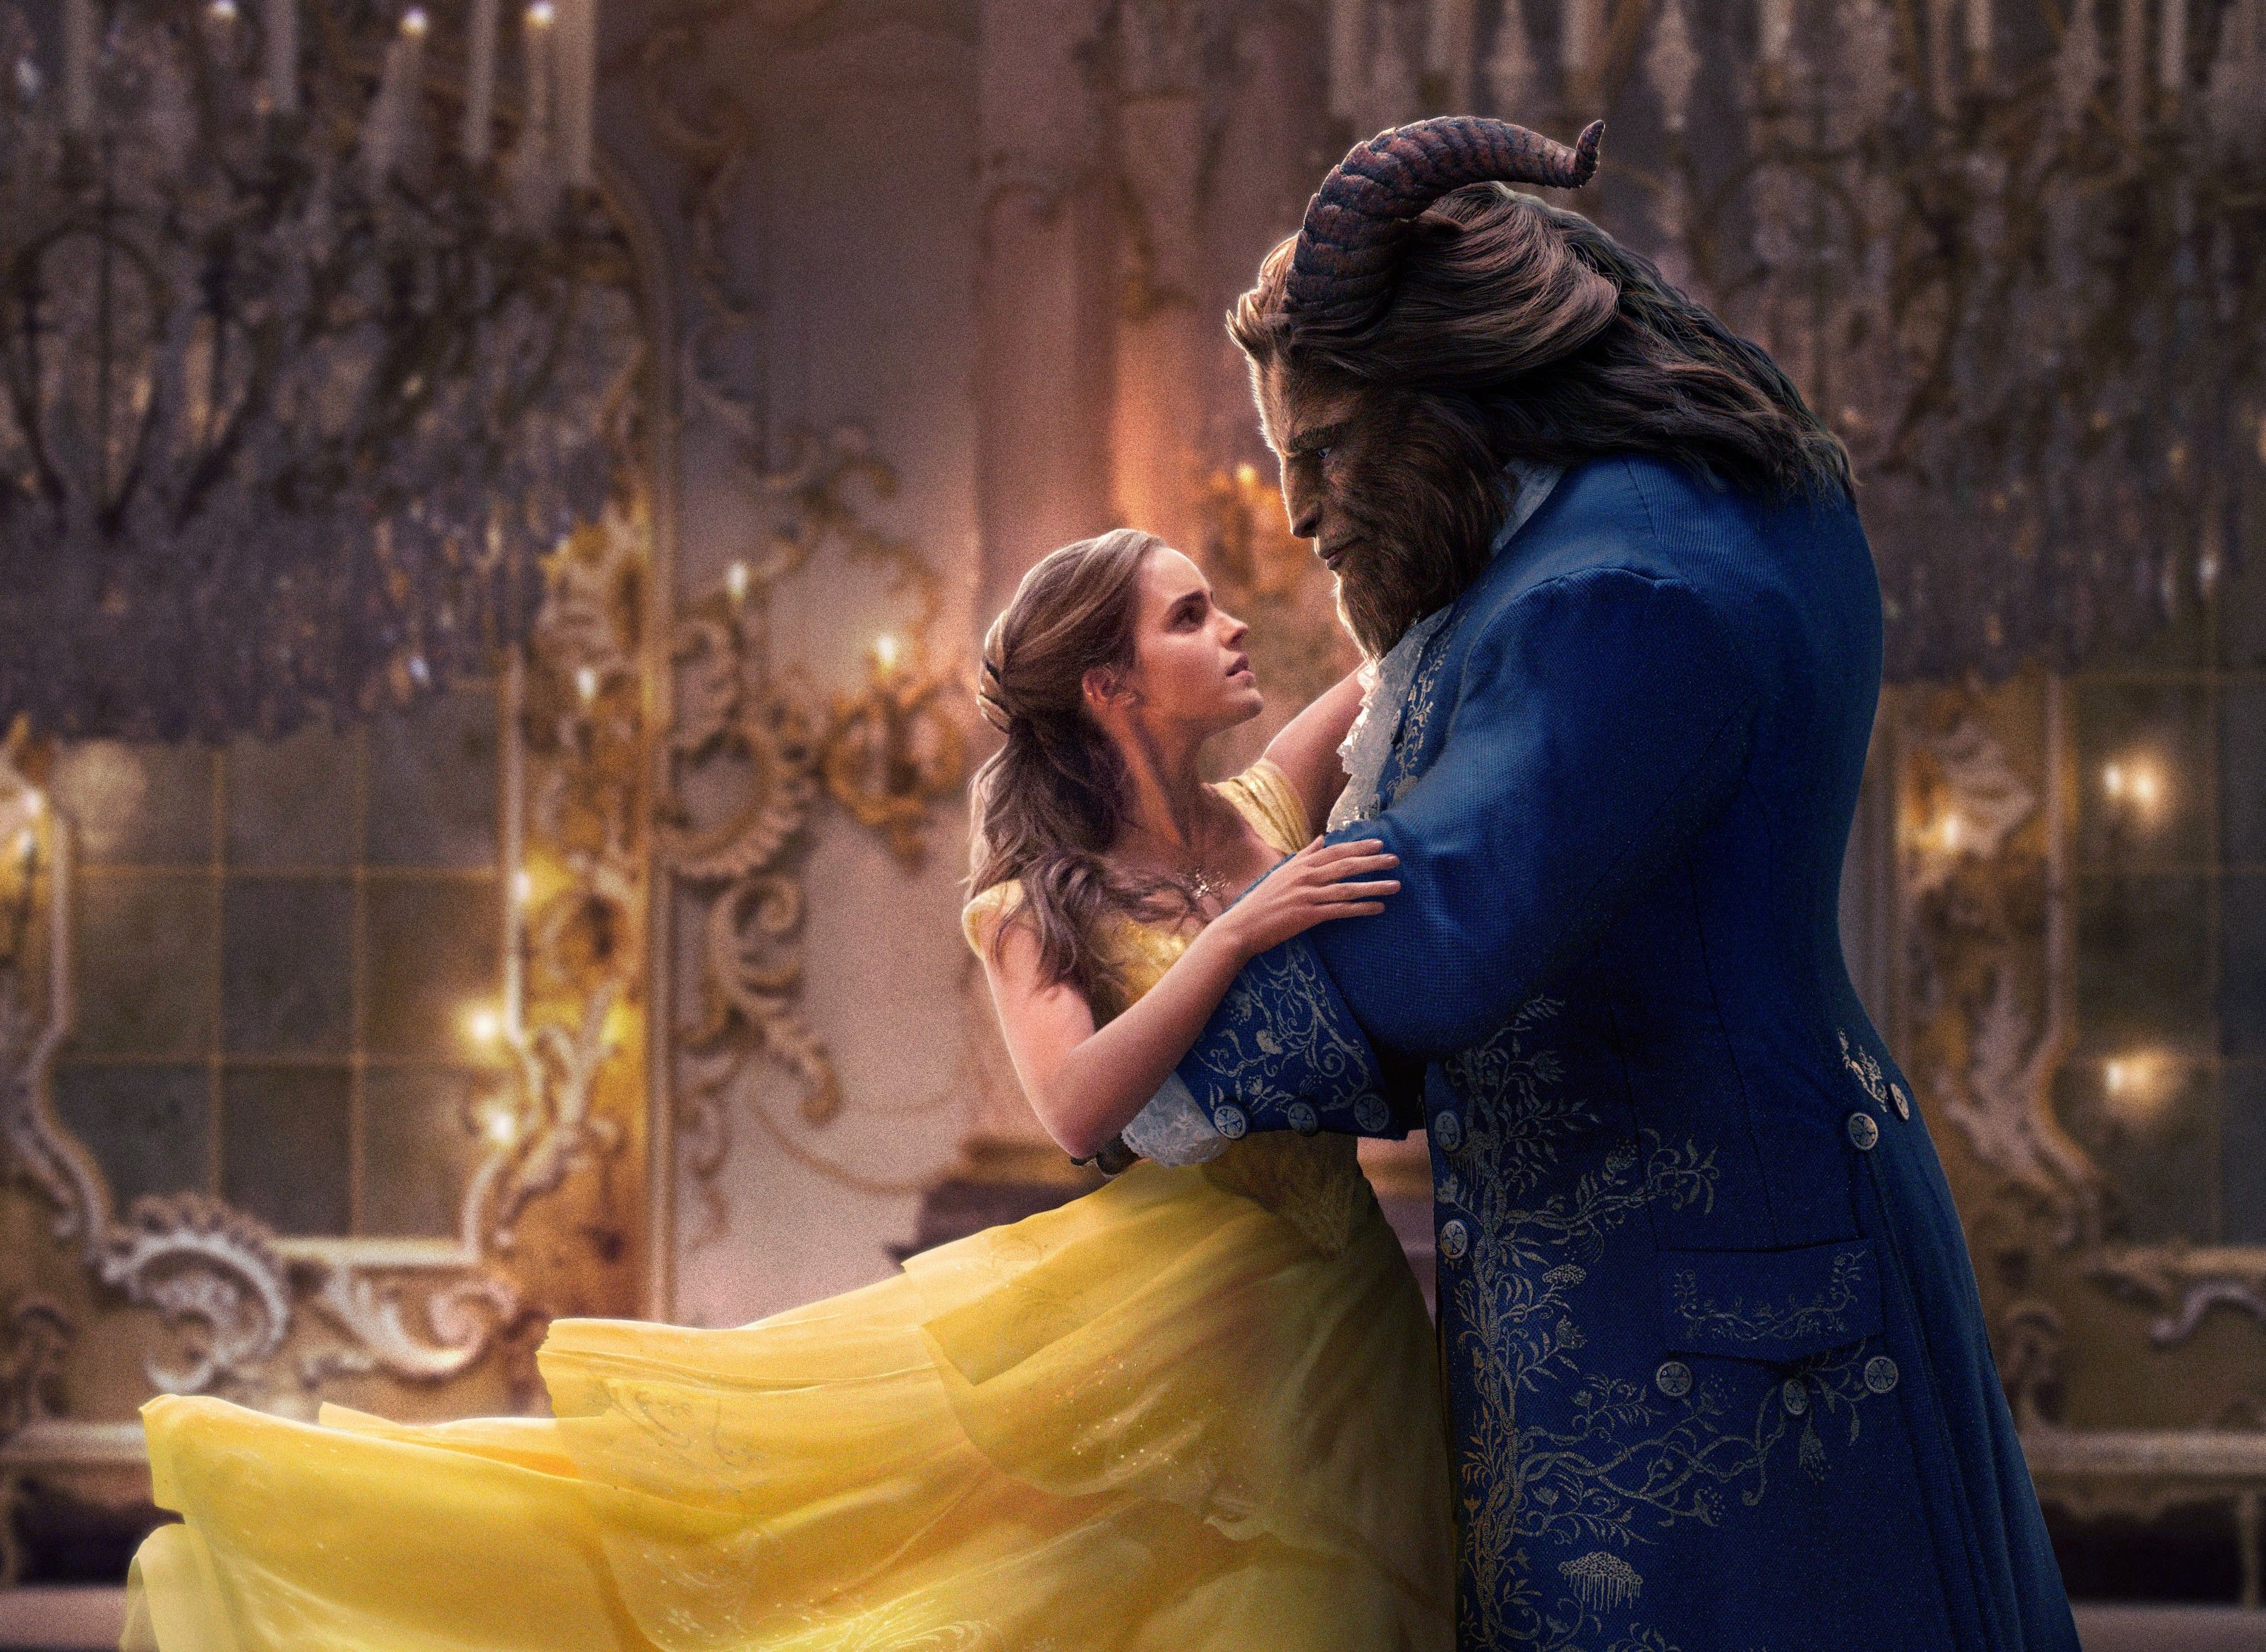 Beauty And The Beast Wallpapers , HD Wallpaper & Backgrounds